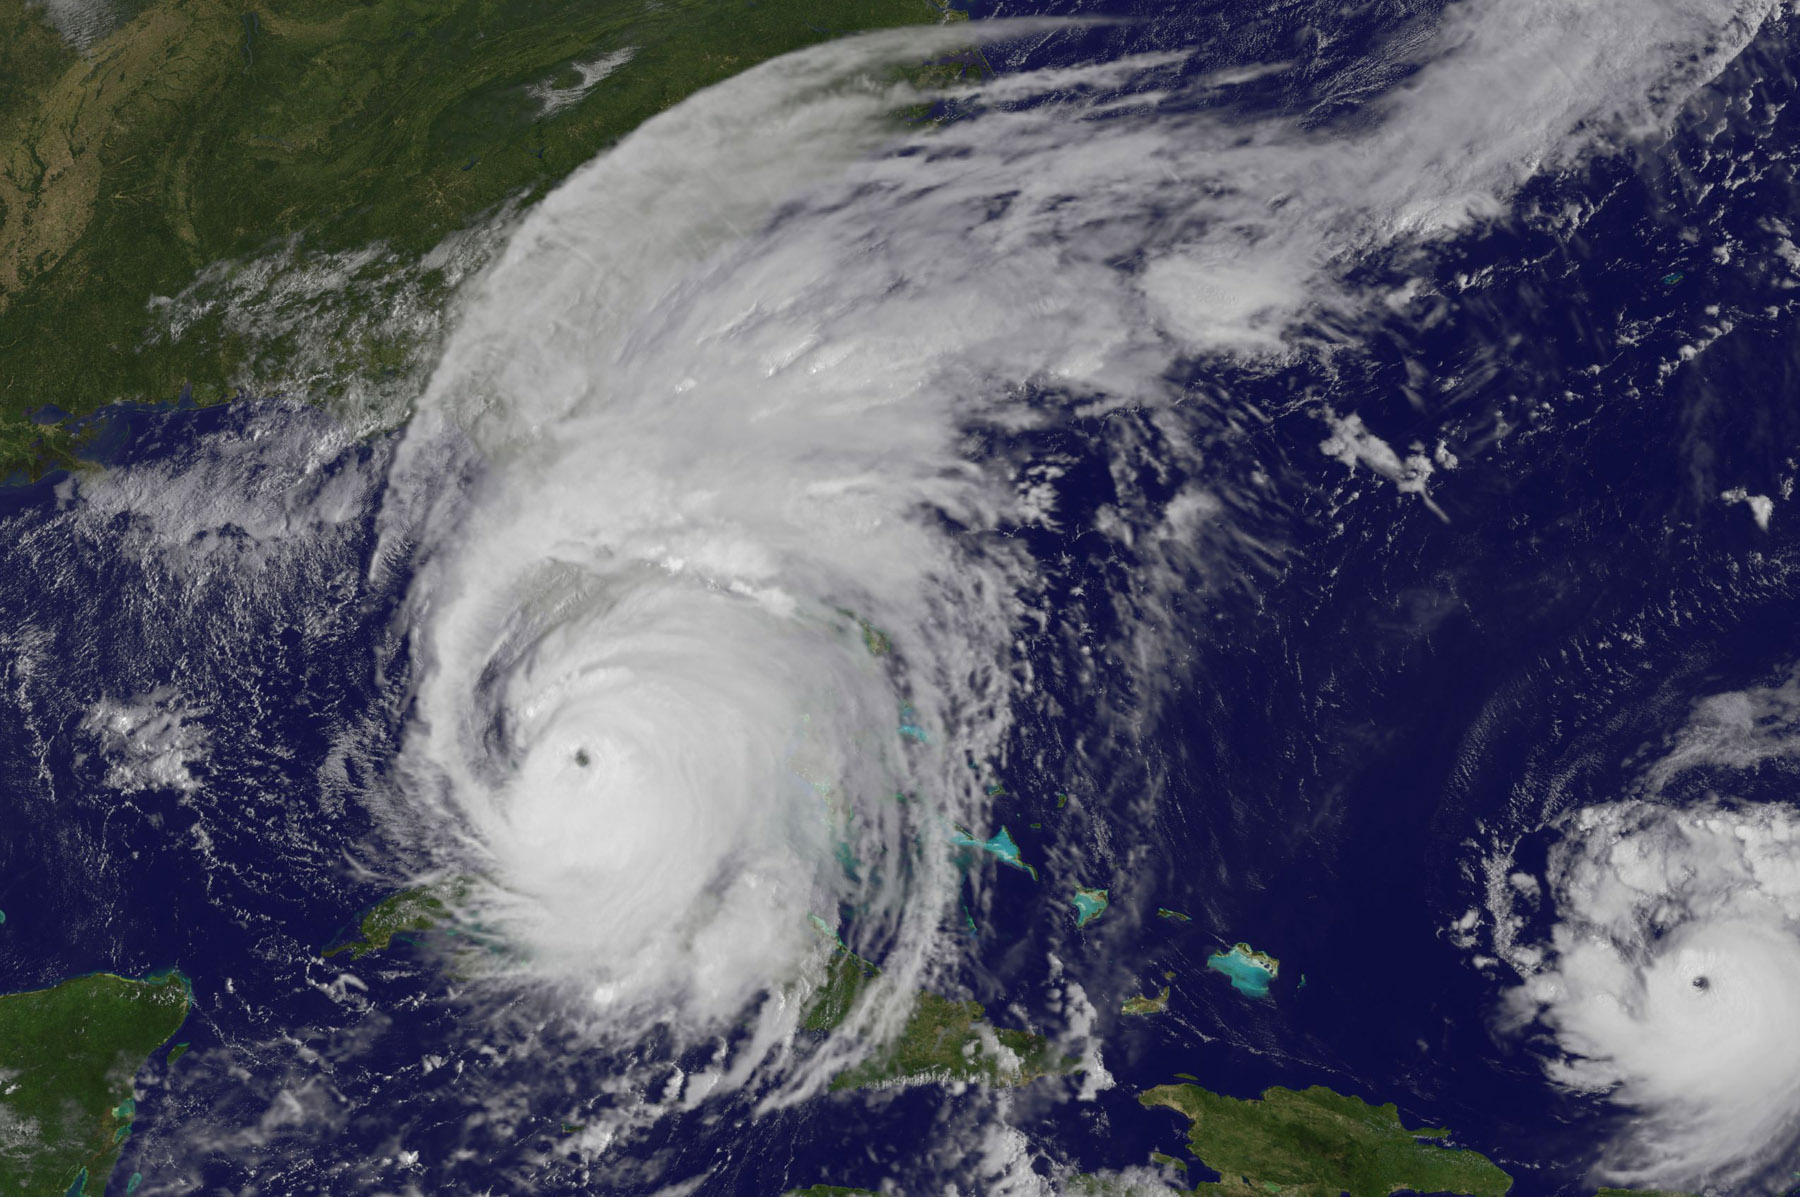 Satellite image of Irma, a swirling mass of clouds over Florida.